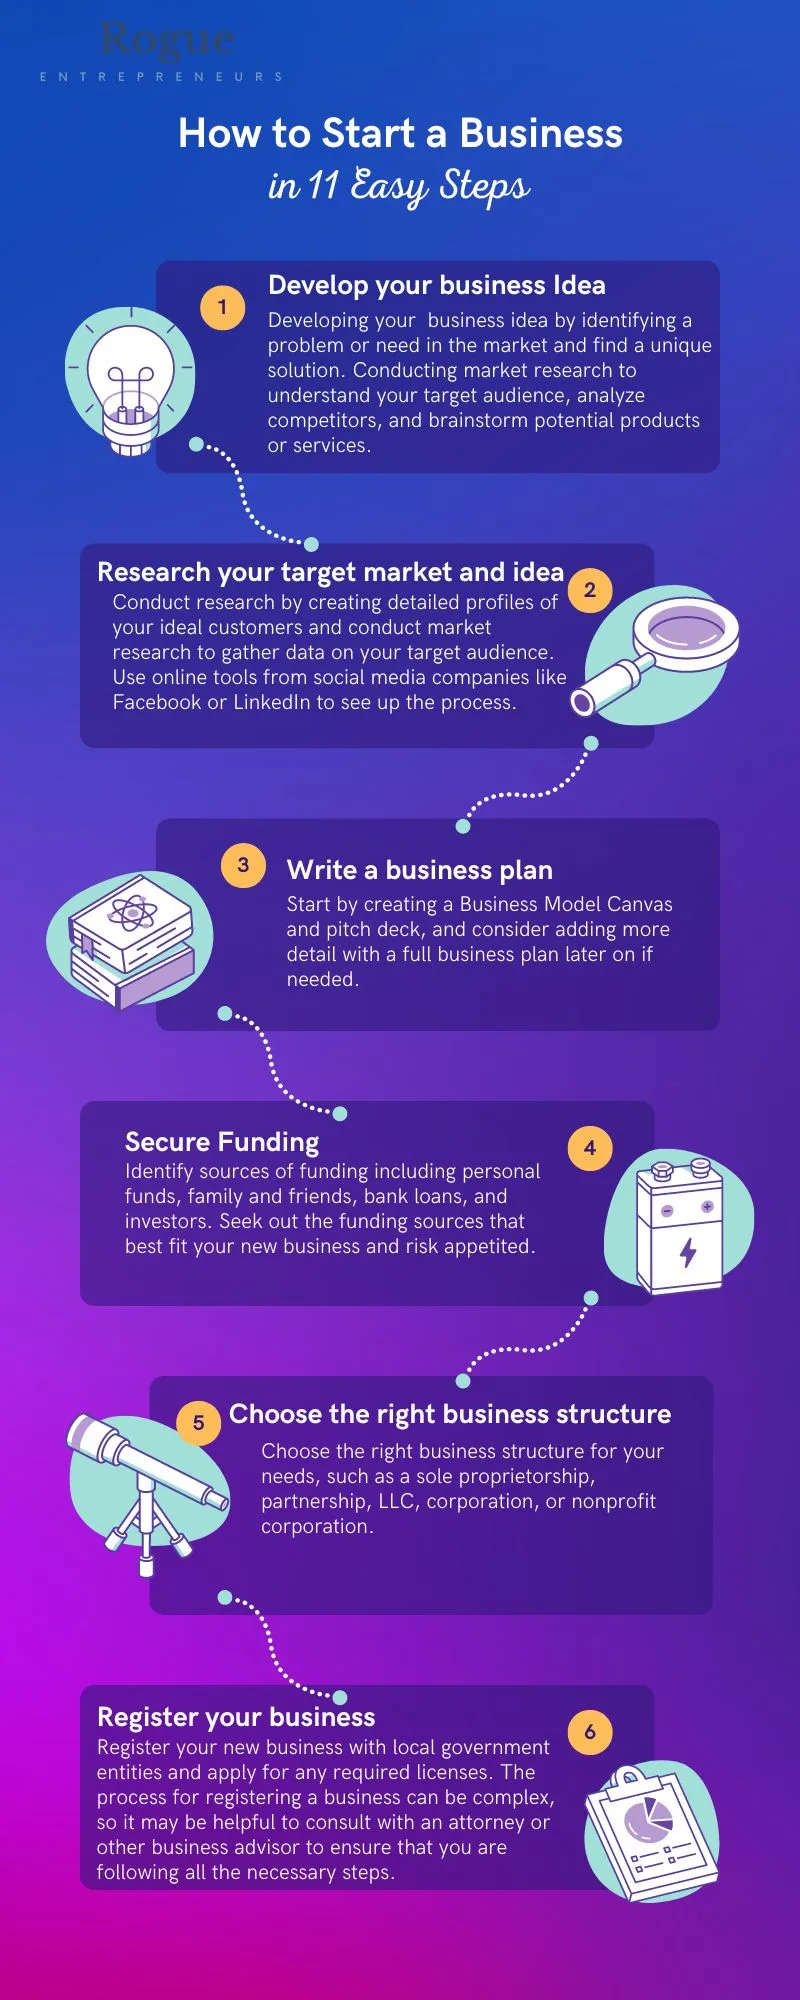 How to start a business : 11 easy steps